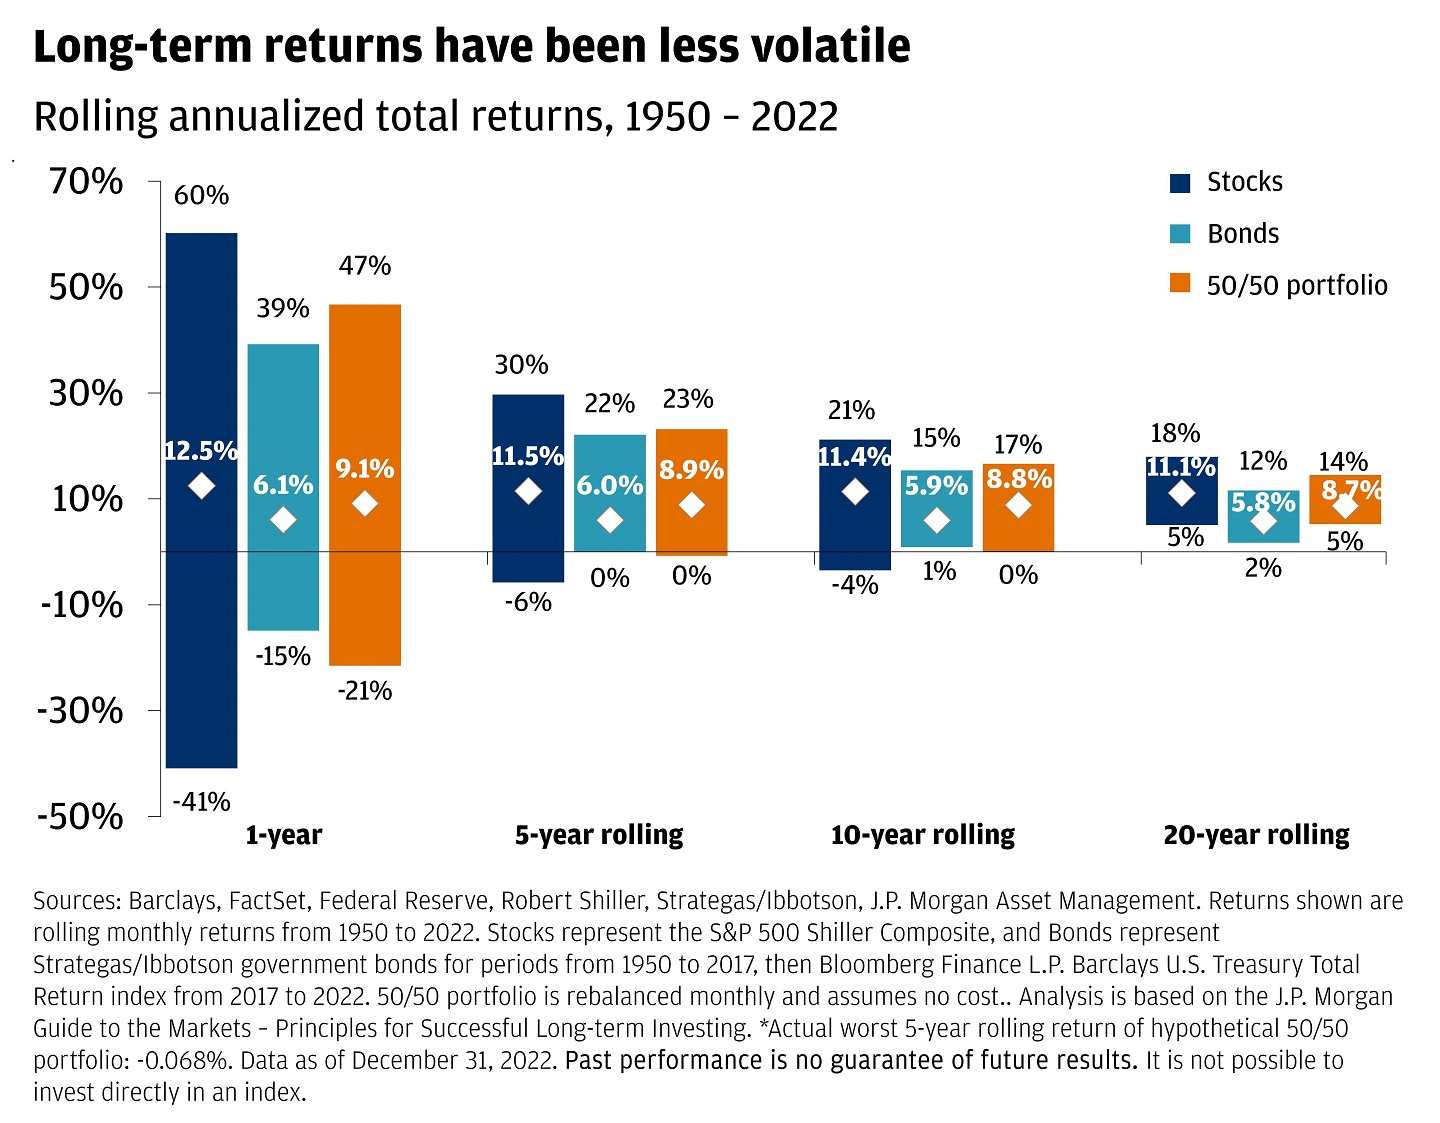 This chart shows rolling annualized total returns, from 1950 until 2022, on a 1-year, 5-year rolling, 10-year rolling, and 20-year rolling basis, for stocks, bonds, and 50/50 portfolio.